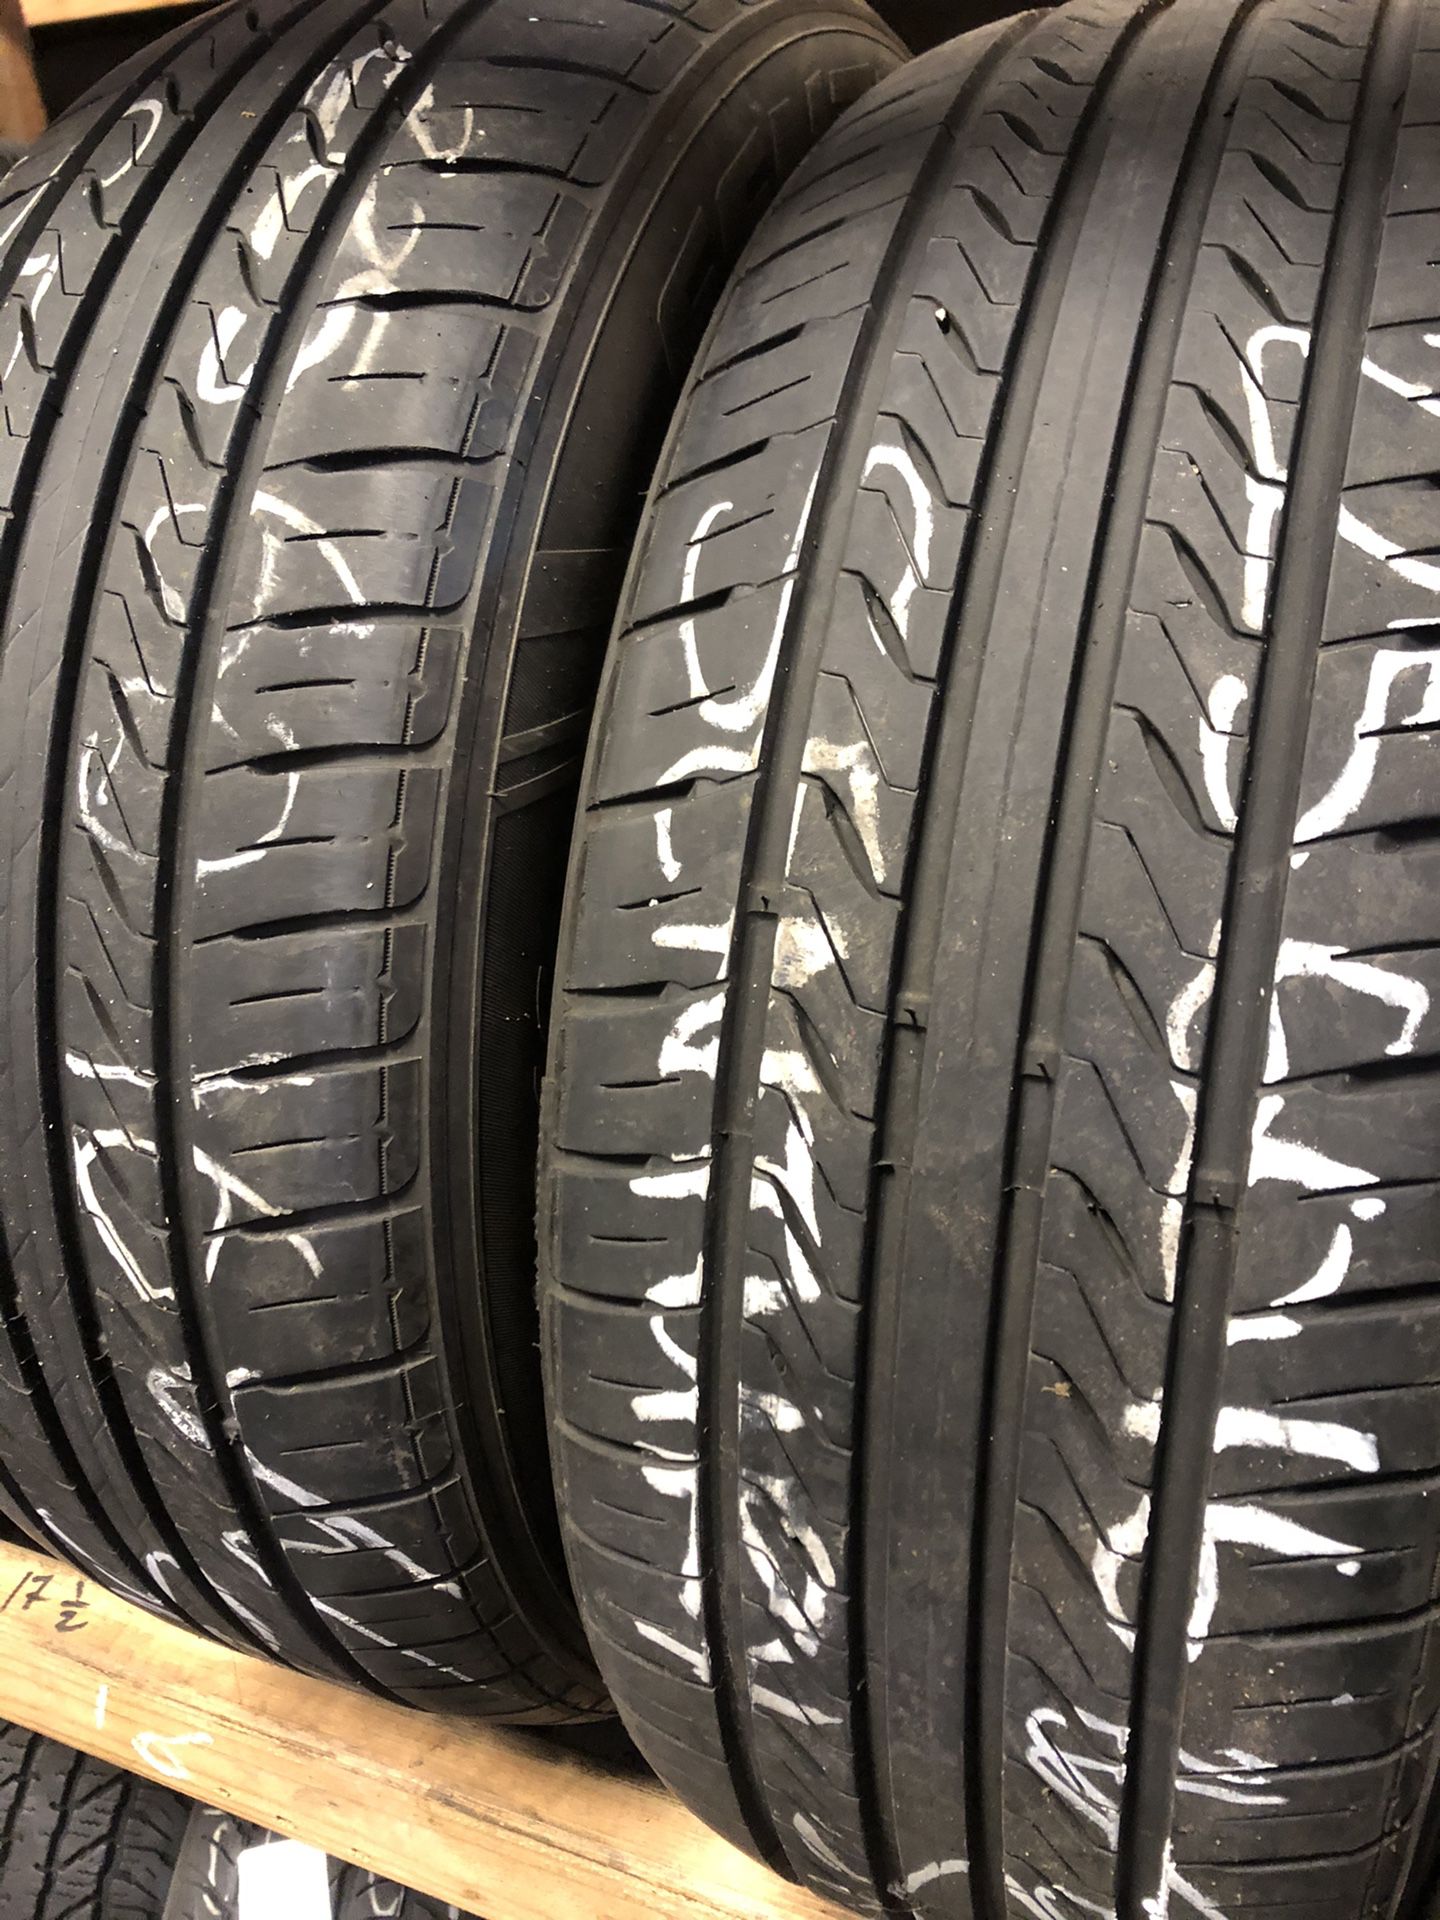 Matching pair (2) 225 60 16 tires for only $38 each with FREE INSTALL!!!